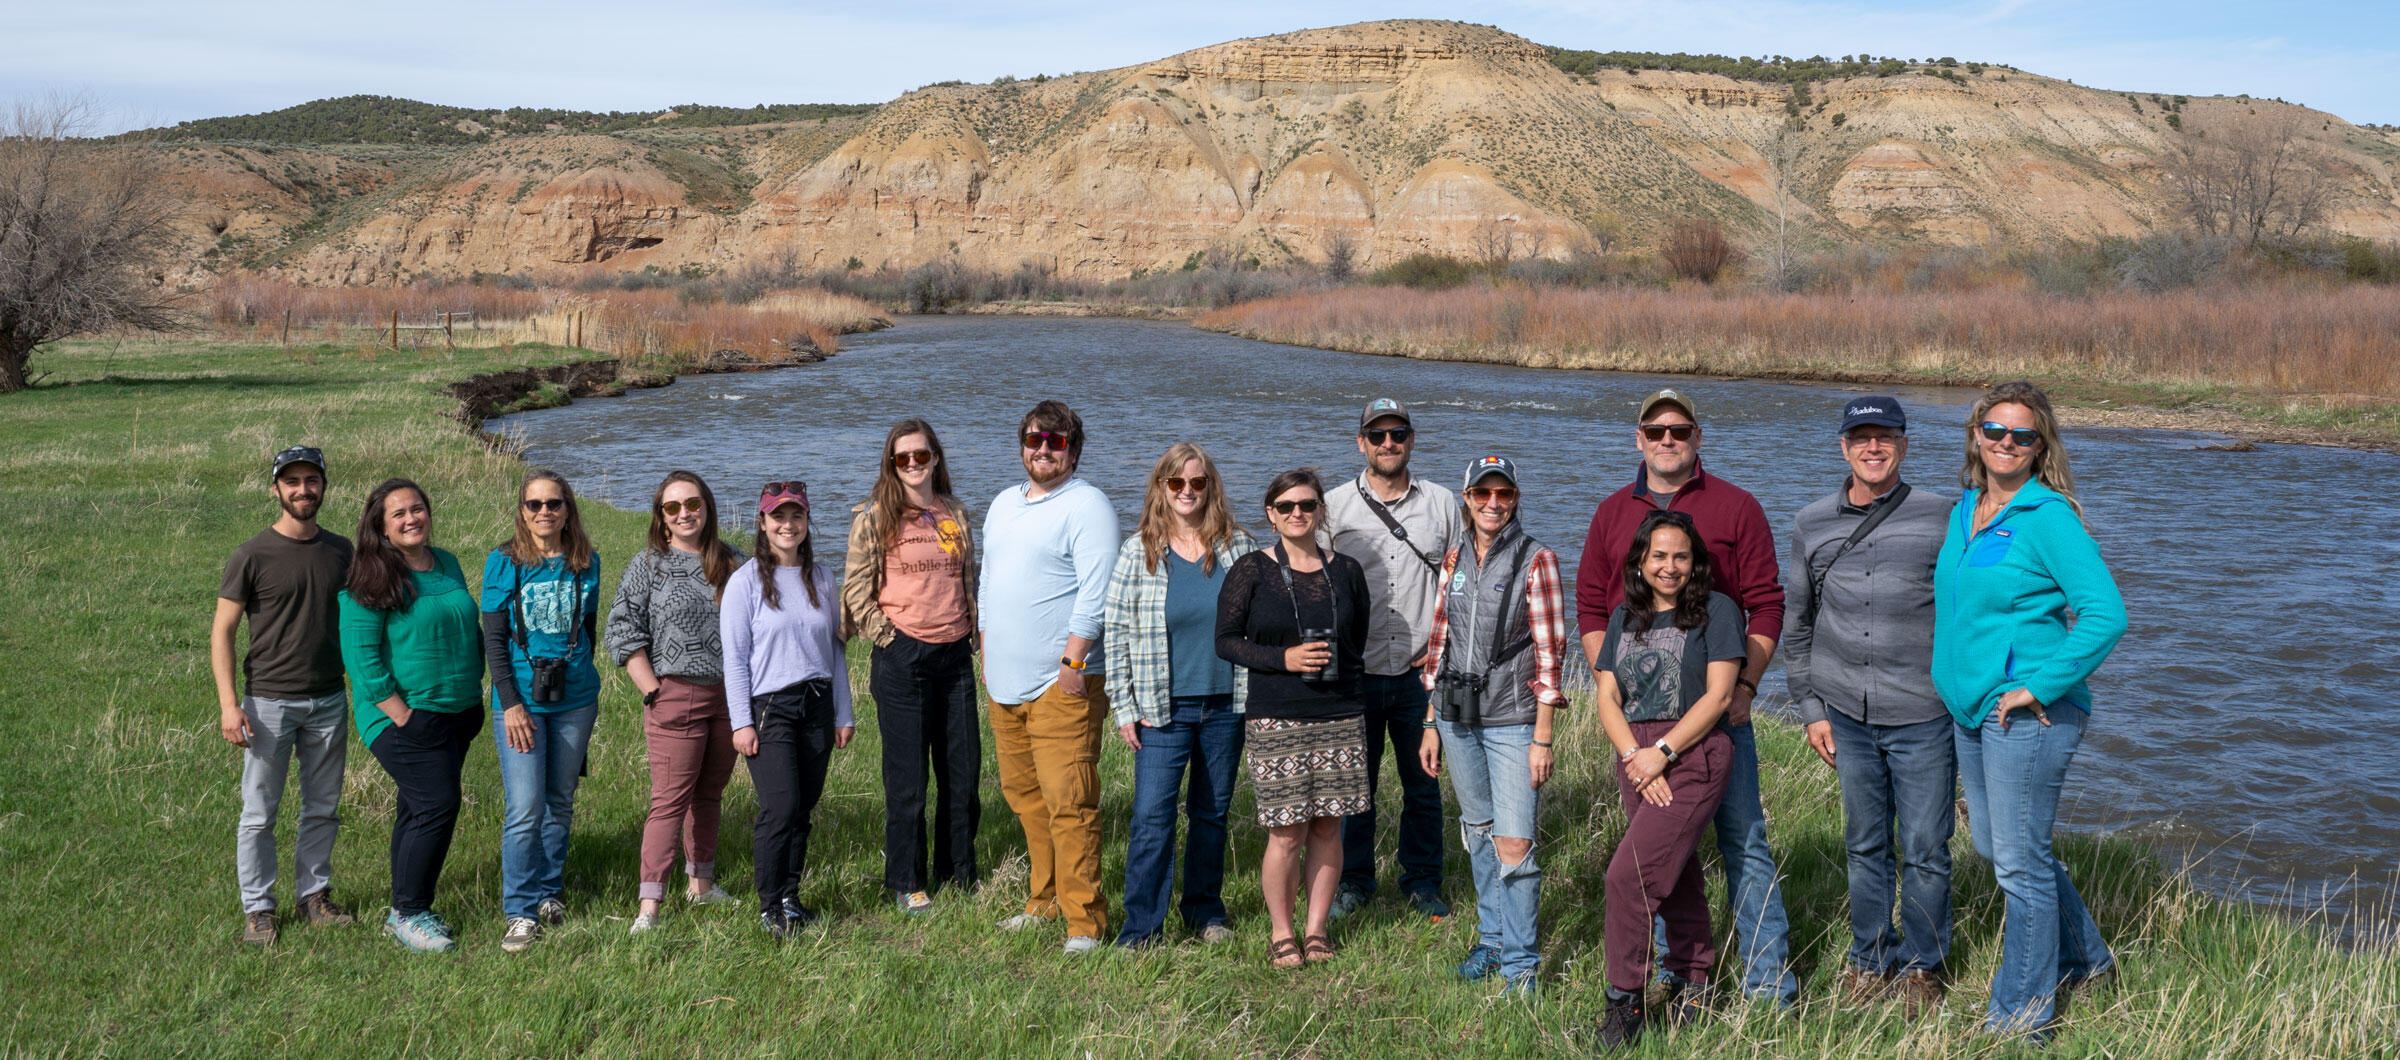 A group of people stand in a field in front of a river and bluff.